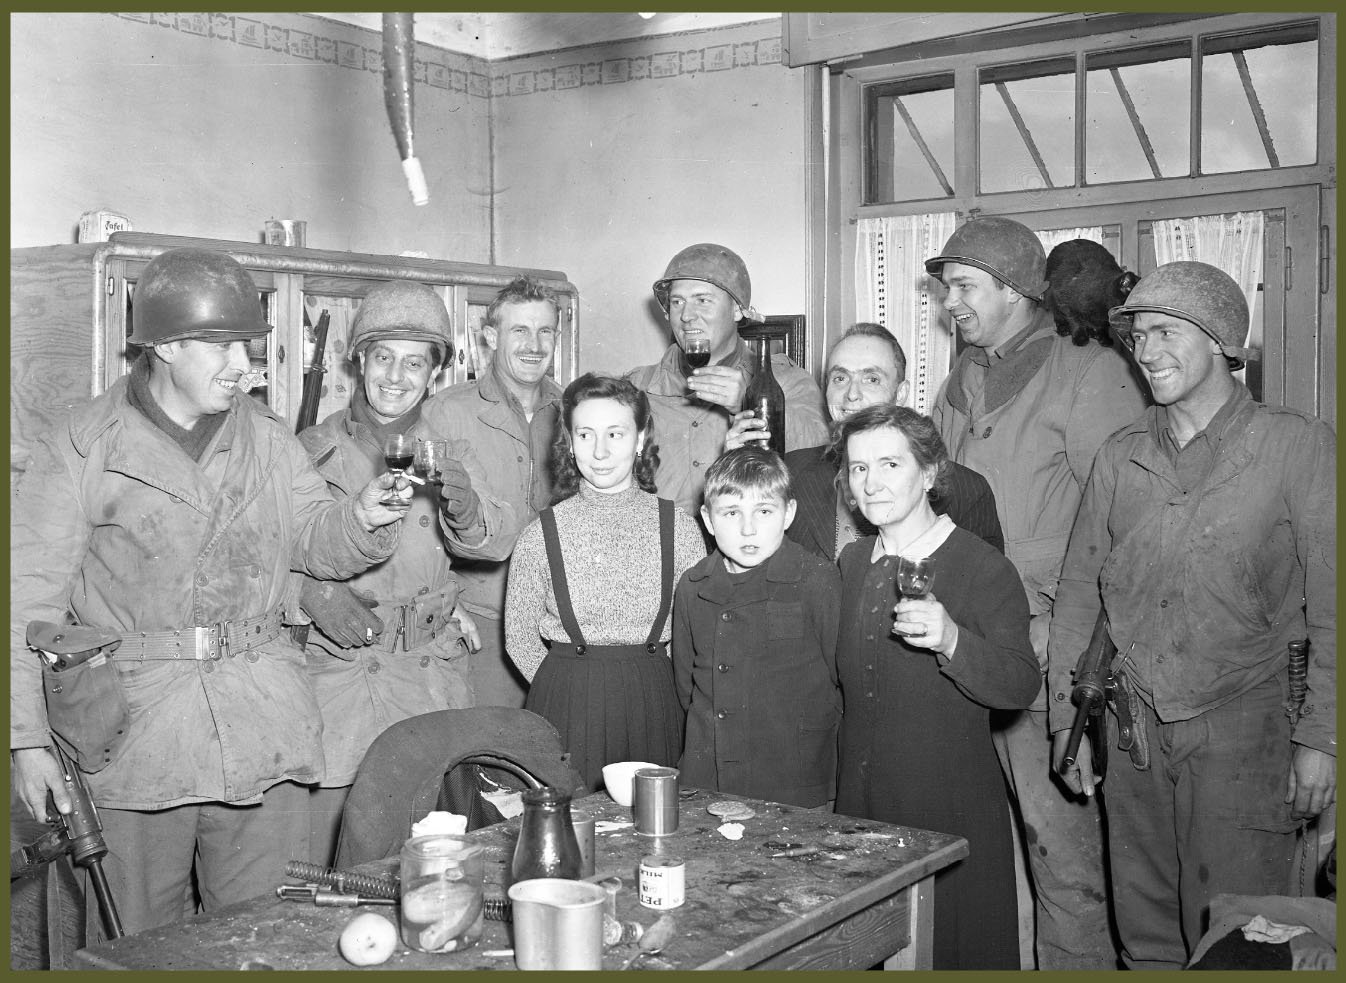 Forced to leave their home, this french Family invites Gi for a drink